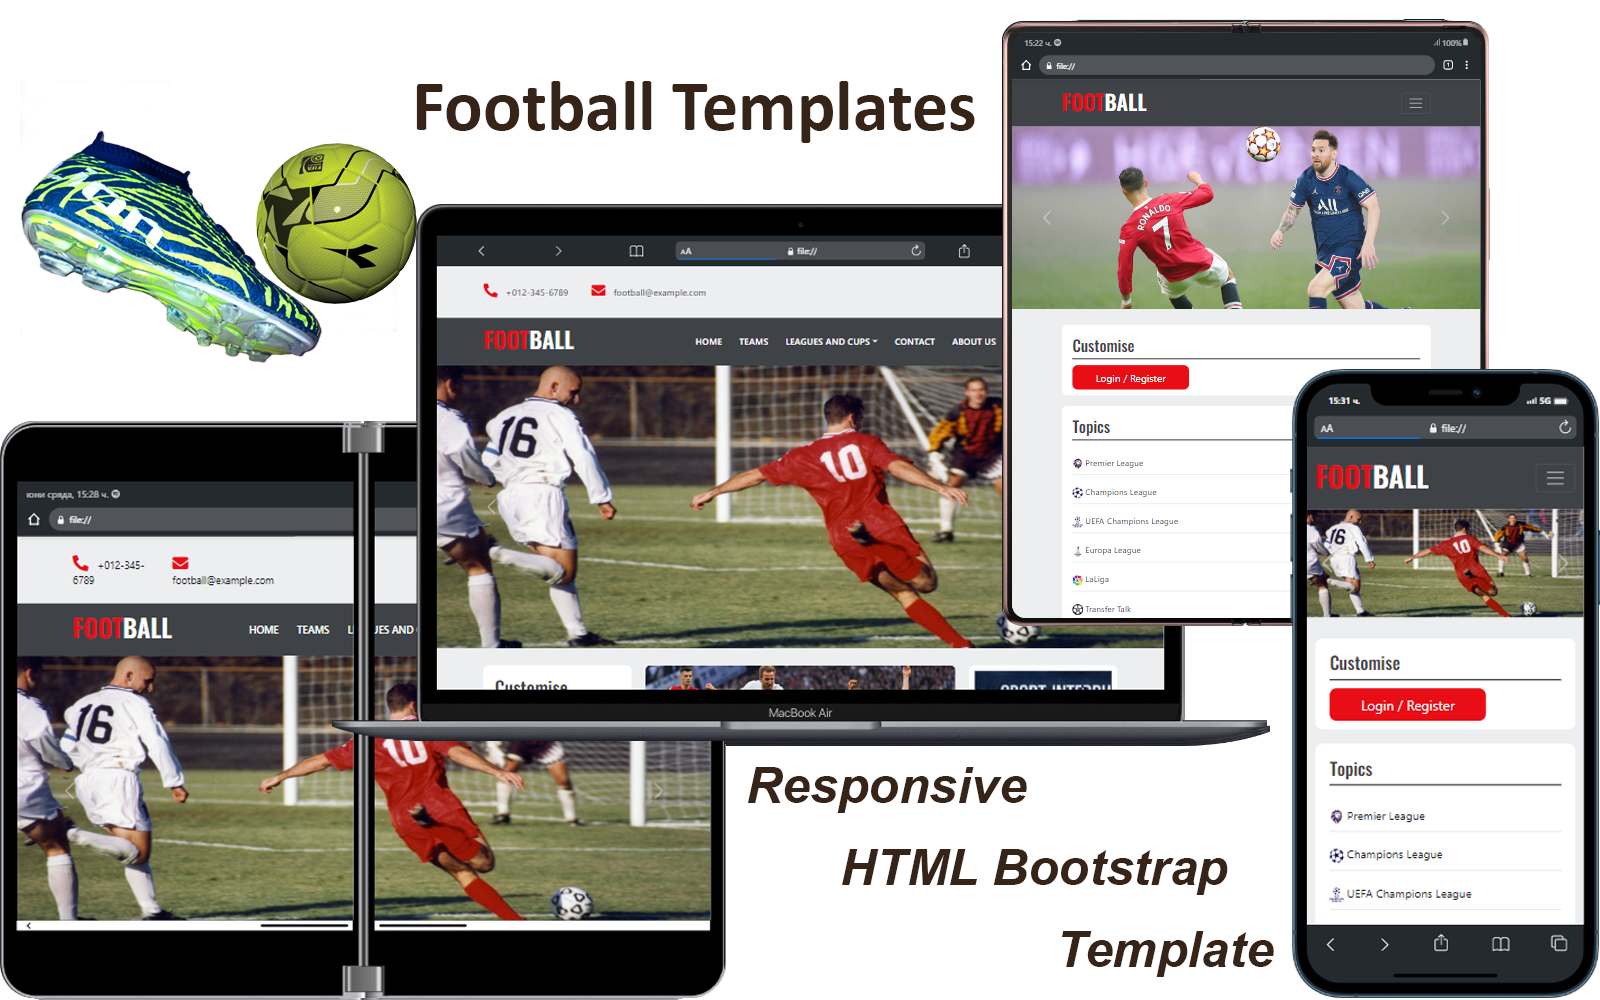 Football Templates - Responsive HTML Bootstrap Template